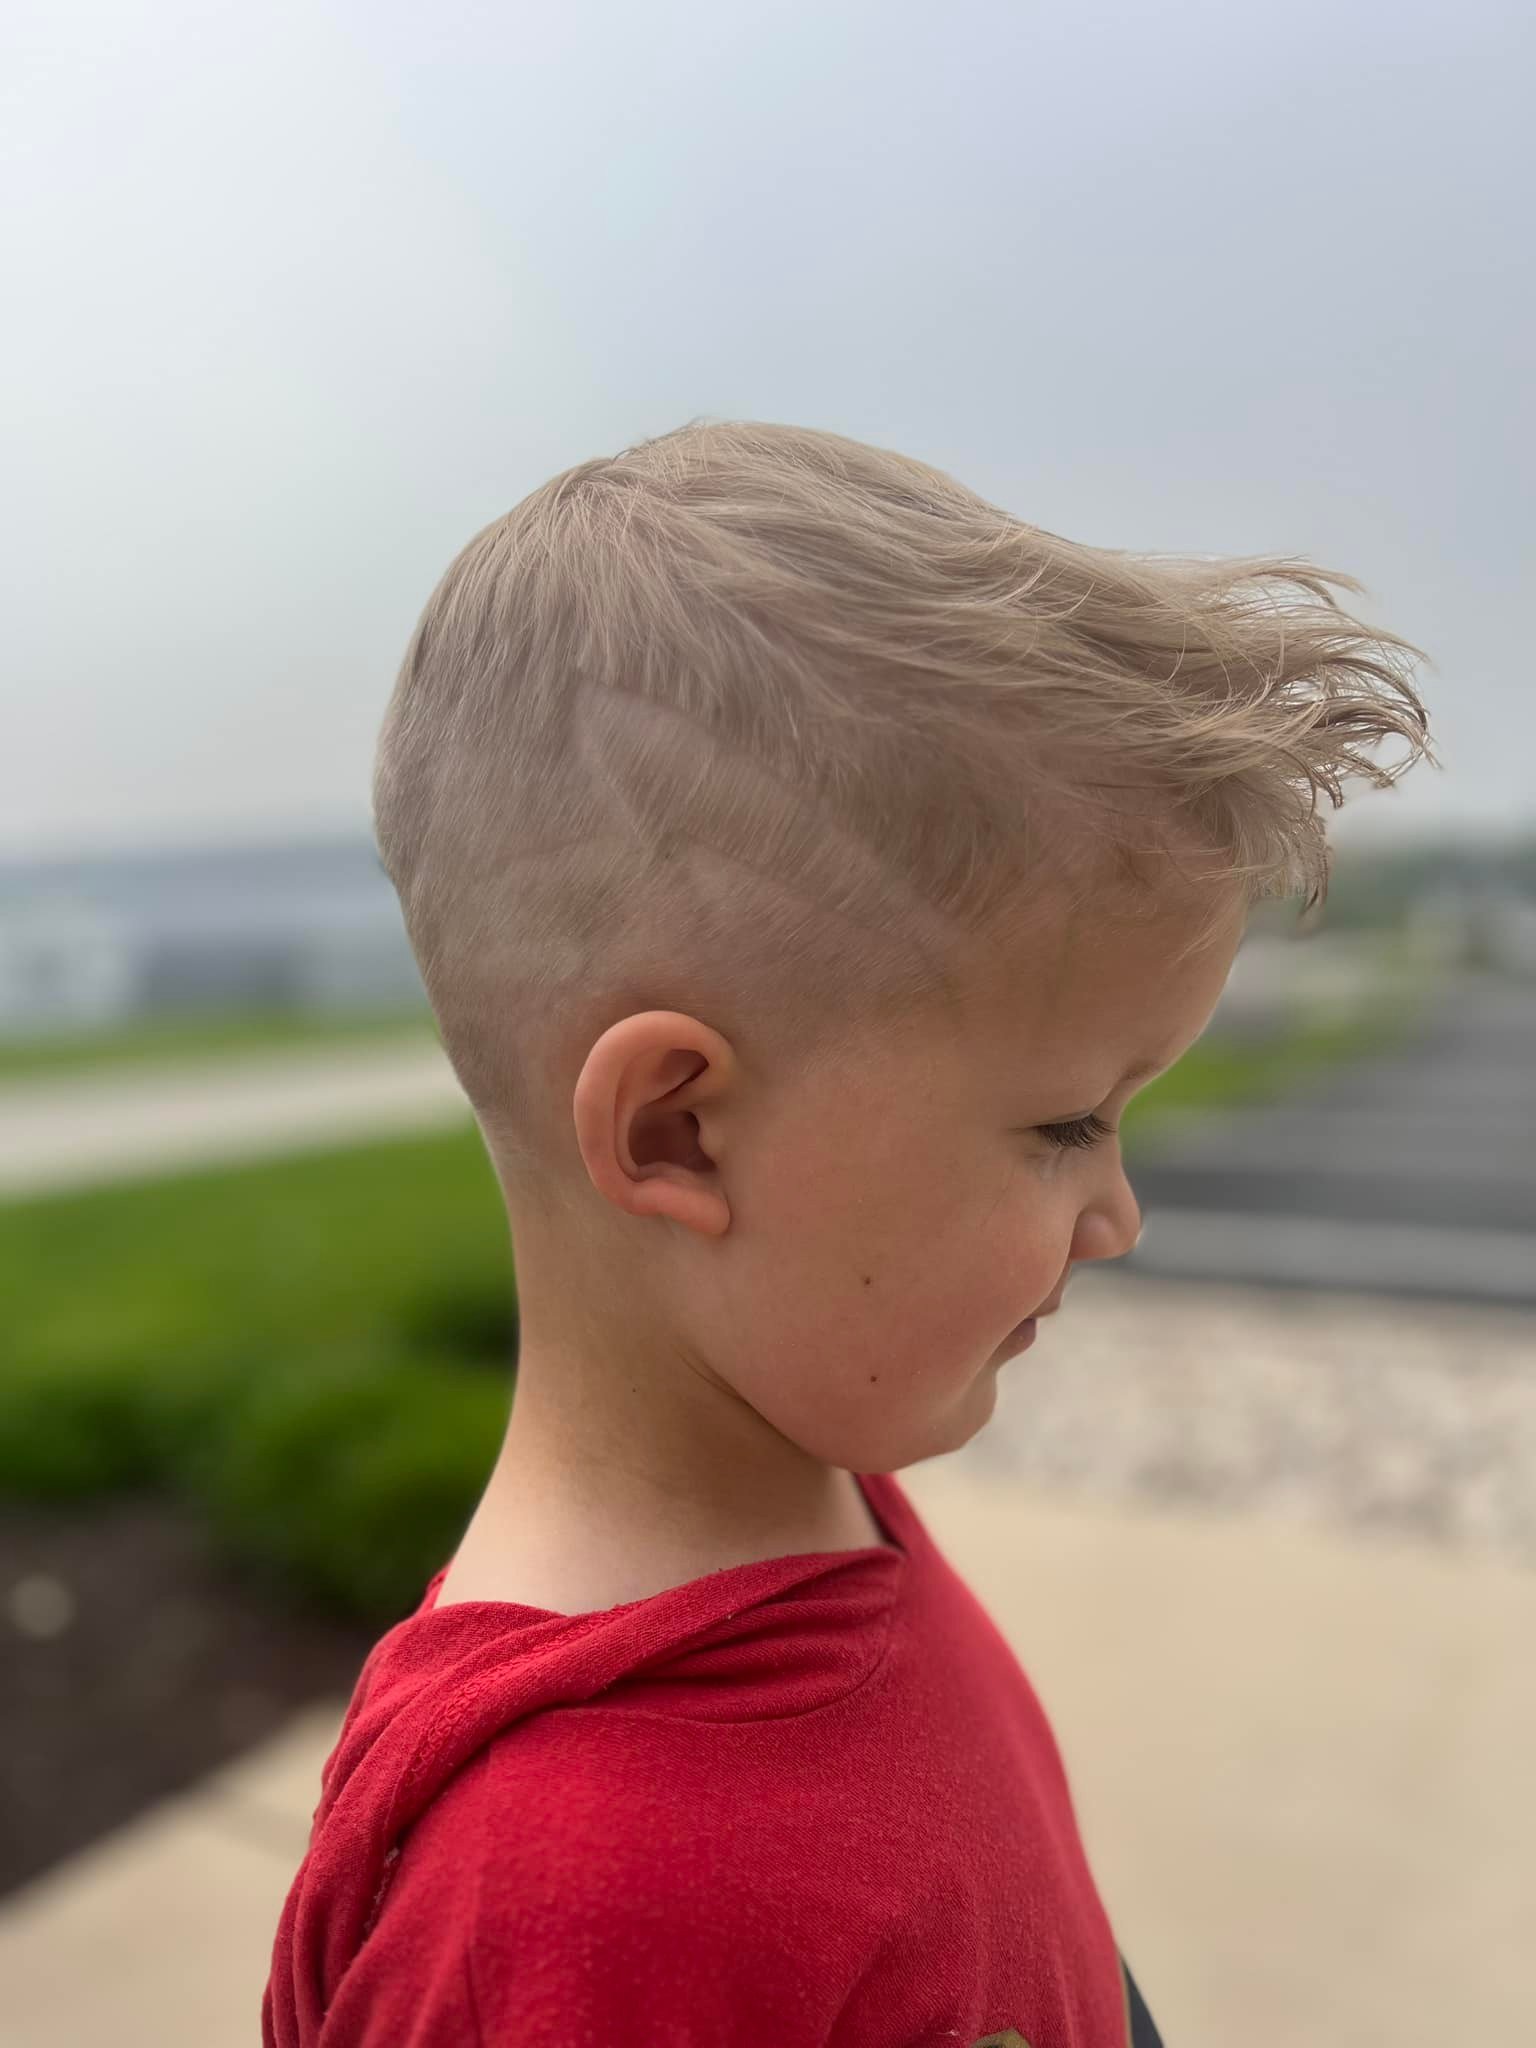 Hey cool dude! 😎

Brooks requested &ldquo;long hair on top and short hair on the sides and double lighting bolts on each side so he can be extra fast&rdquo; &amp; Miss Erin at Salon di Amici, Neenah WI knocked it outta the park! 

He&rsquo;s a super